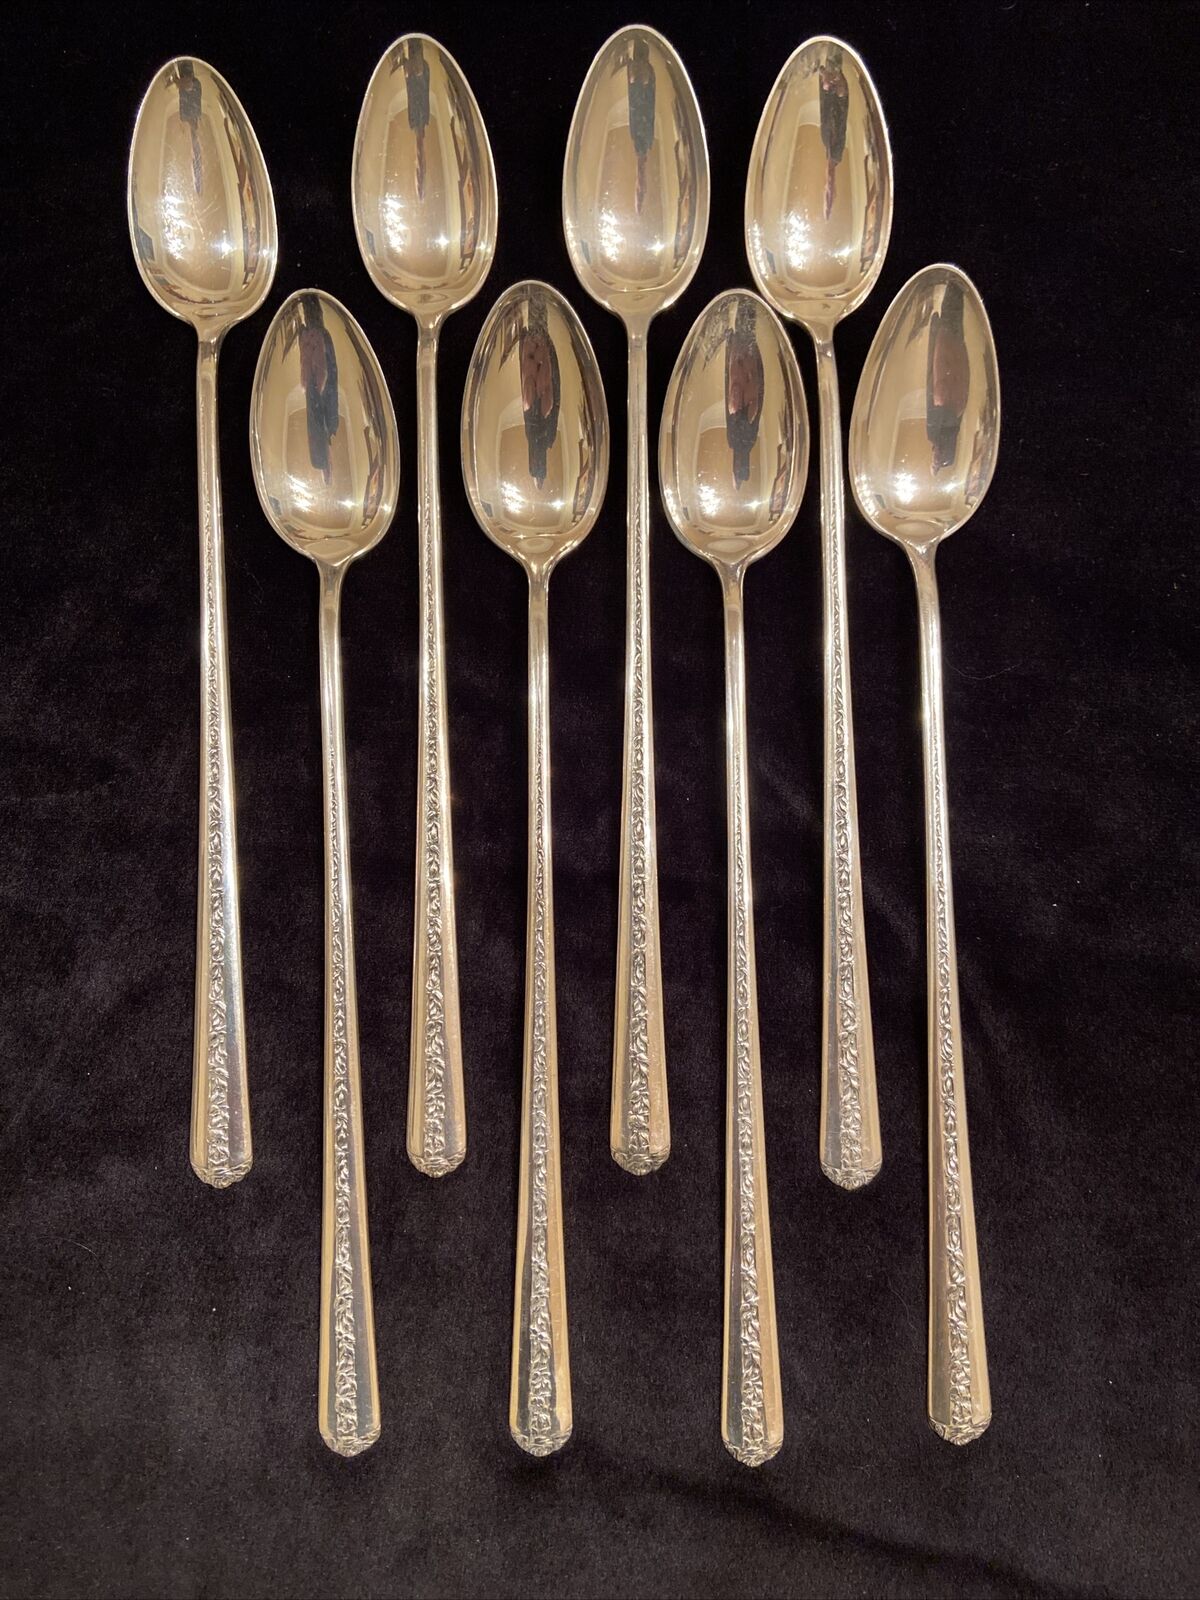 8 (Eight) Rambler Rose by Towle Sterling Silver Iced Tea Spoons 8"